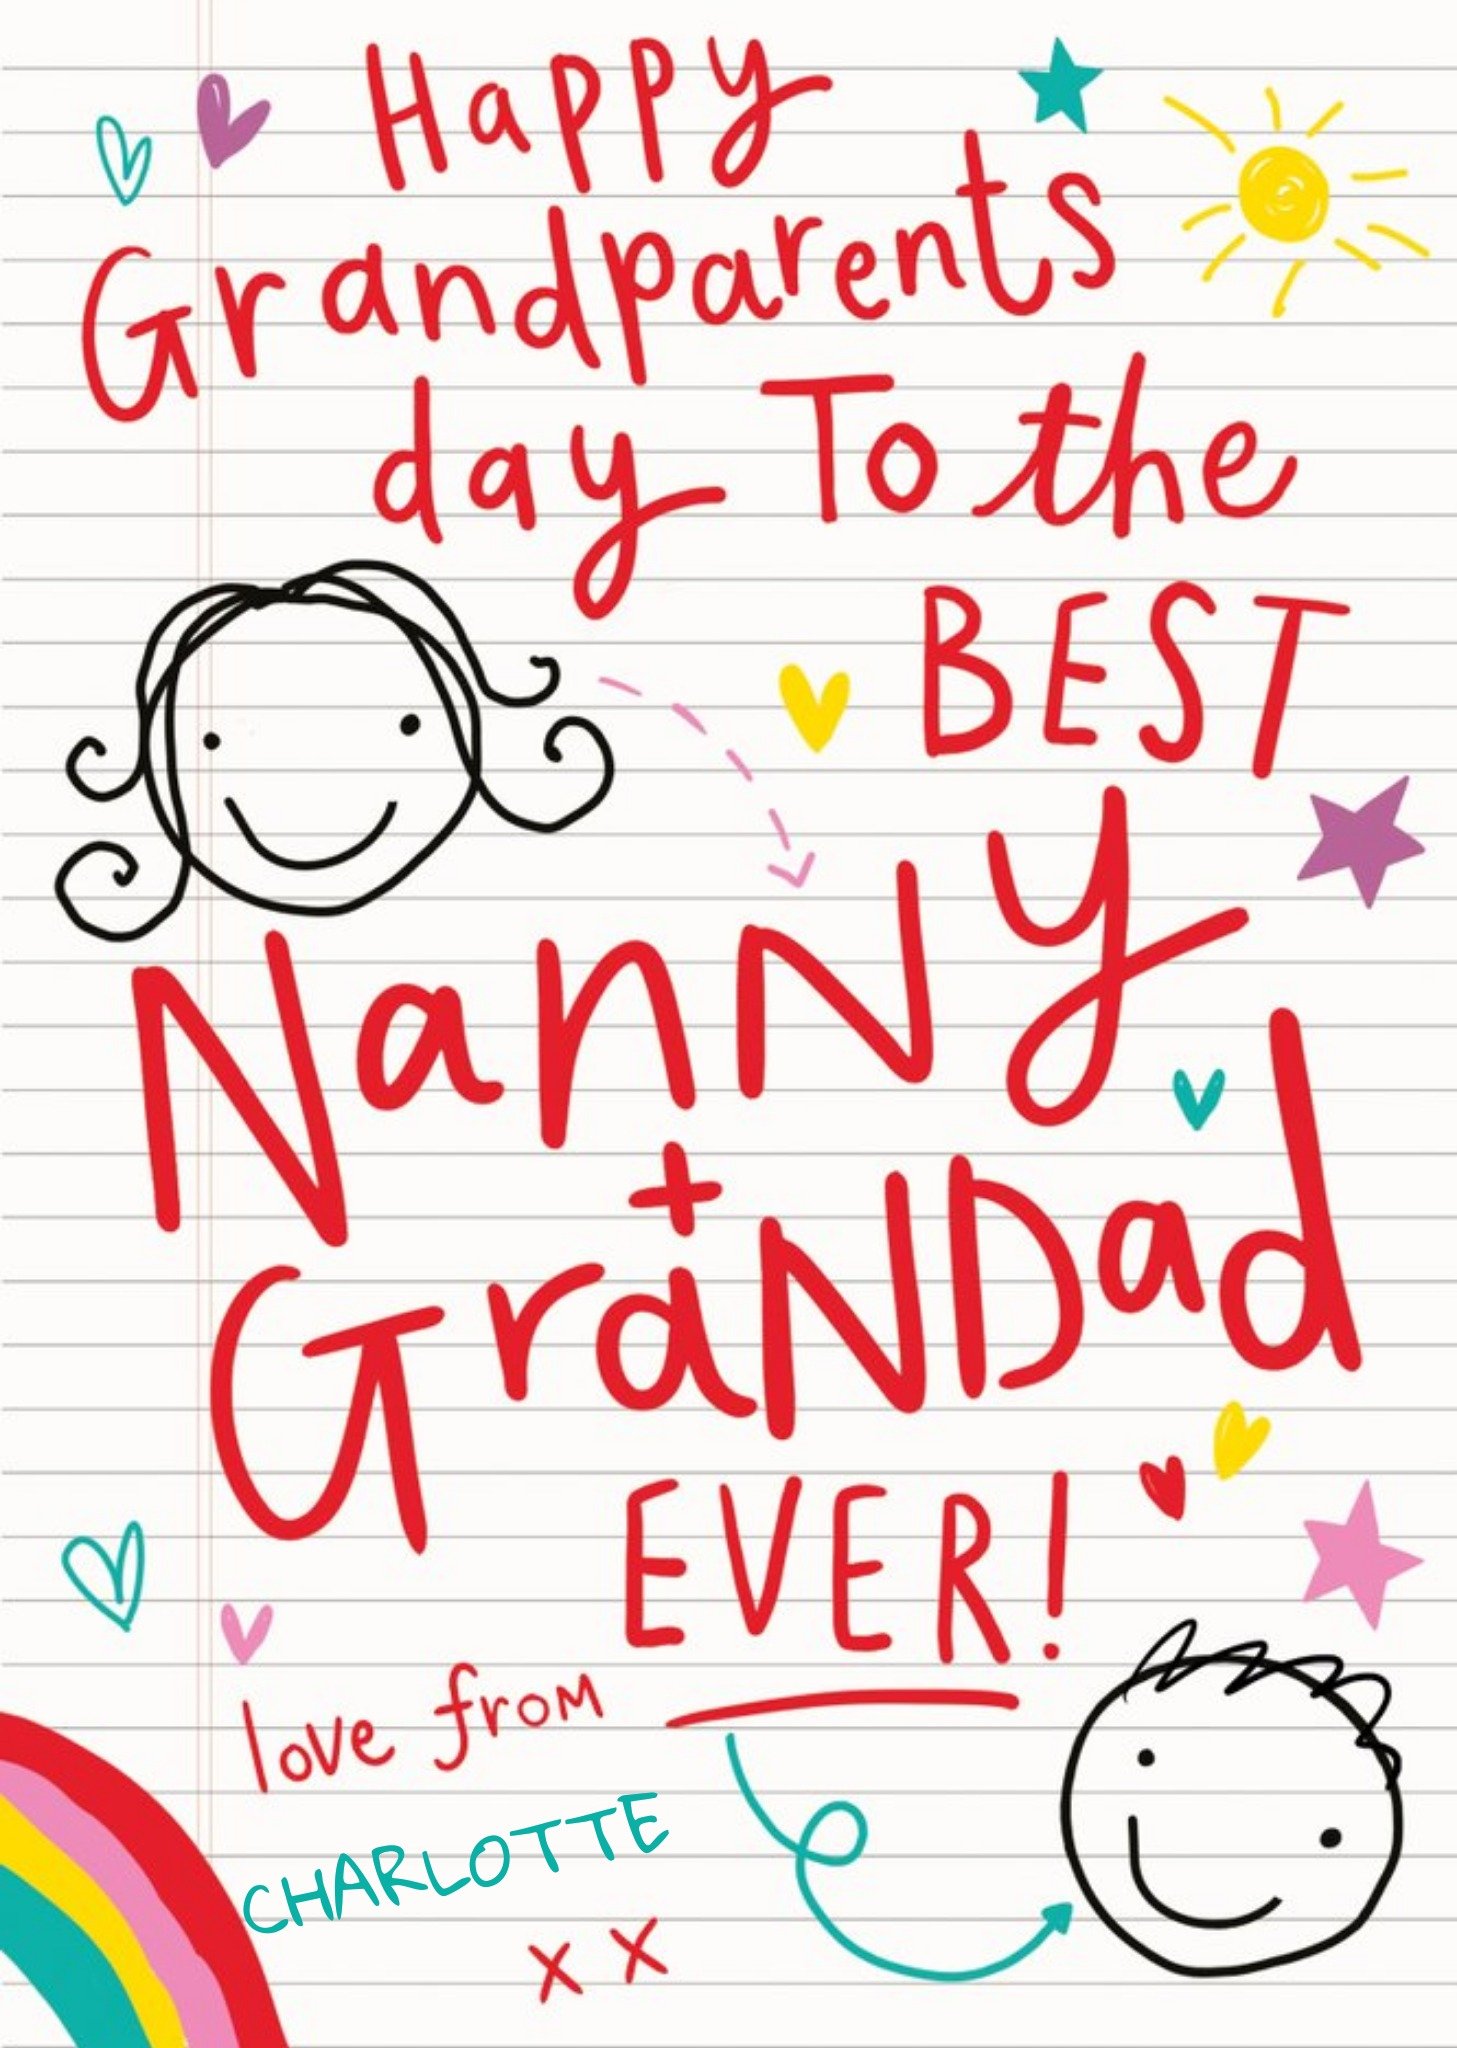 Moonpig Grandparents Day Card With Childs Stick Drawings For Nanny And Grandad Ecard